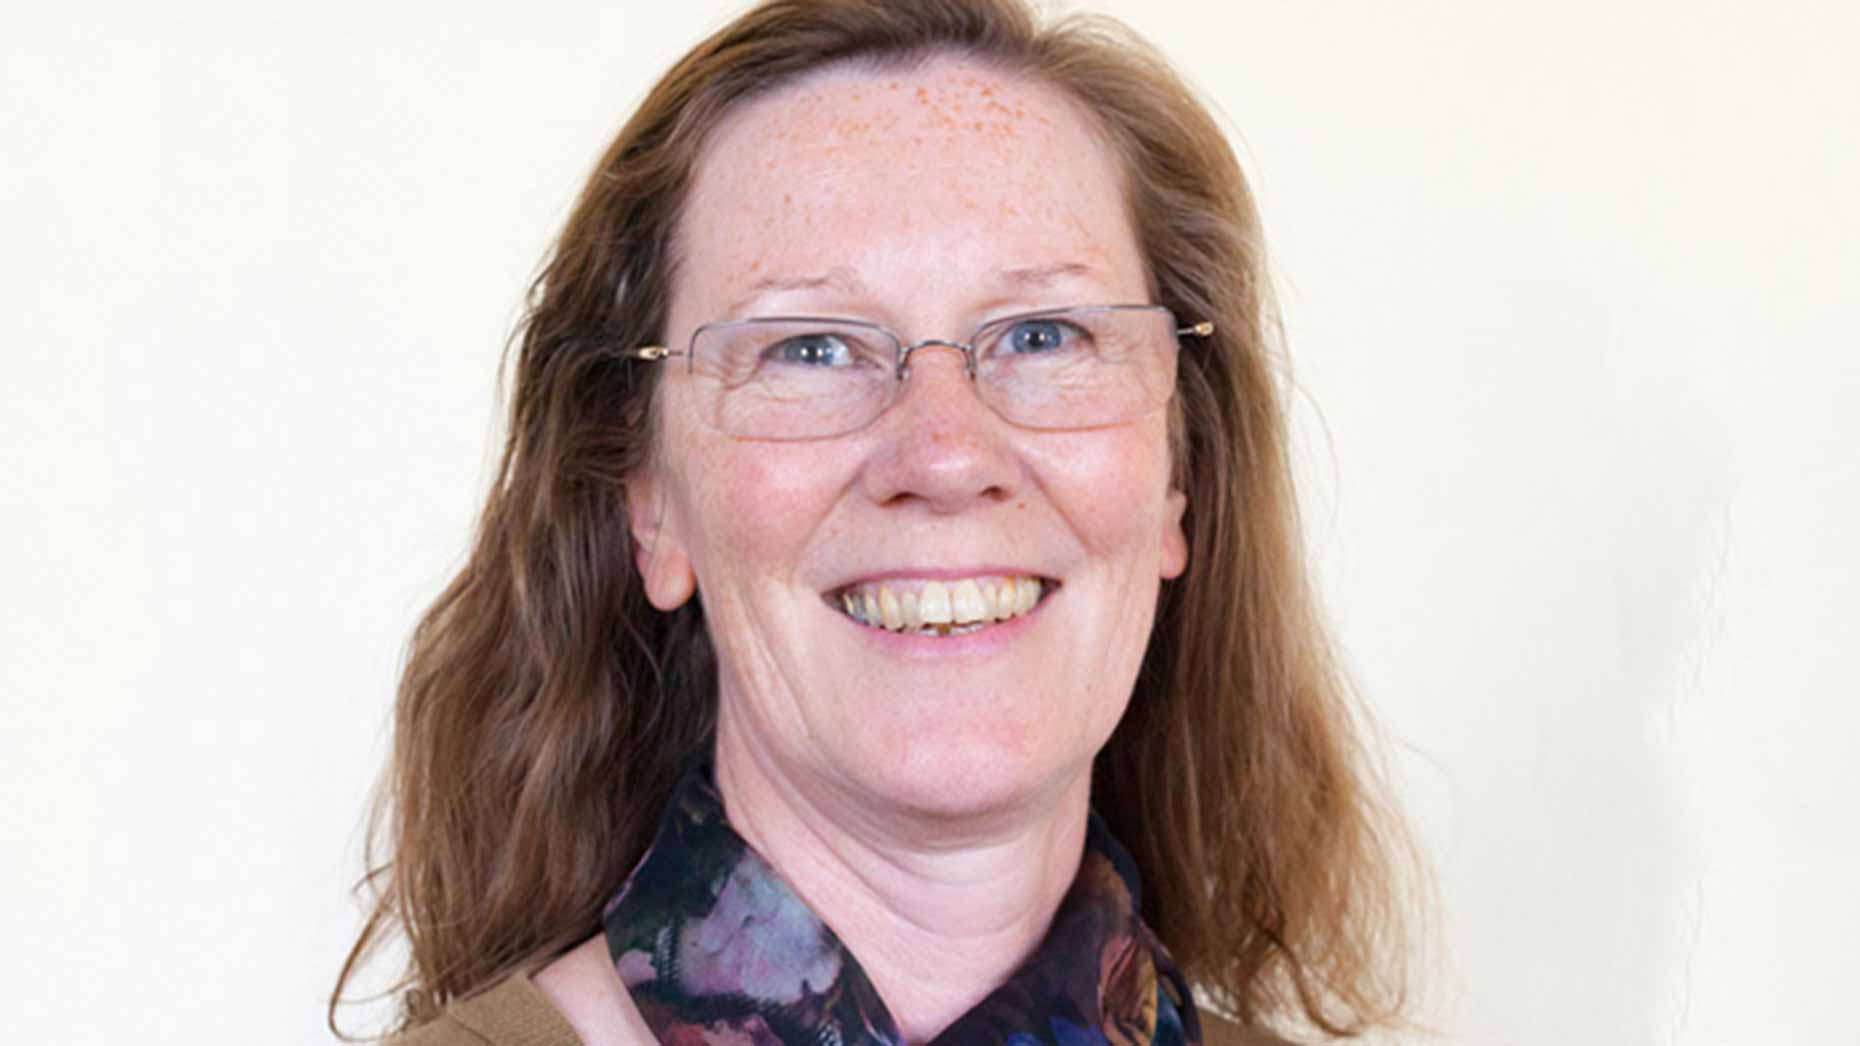 Councillor Laura Conway resigned Tuesday, 30 August due to work commitments. Photo: North Kesteven District Council.